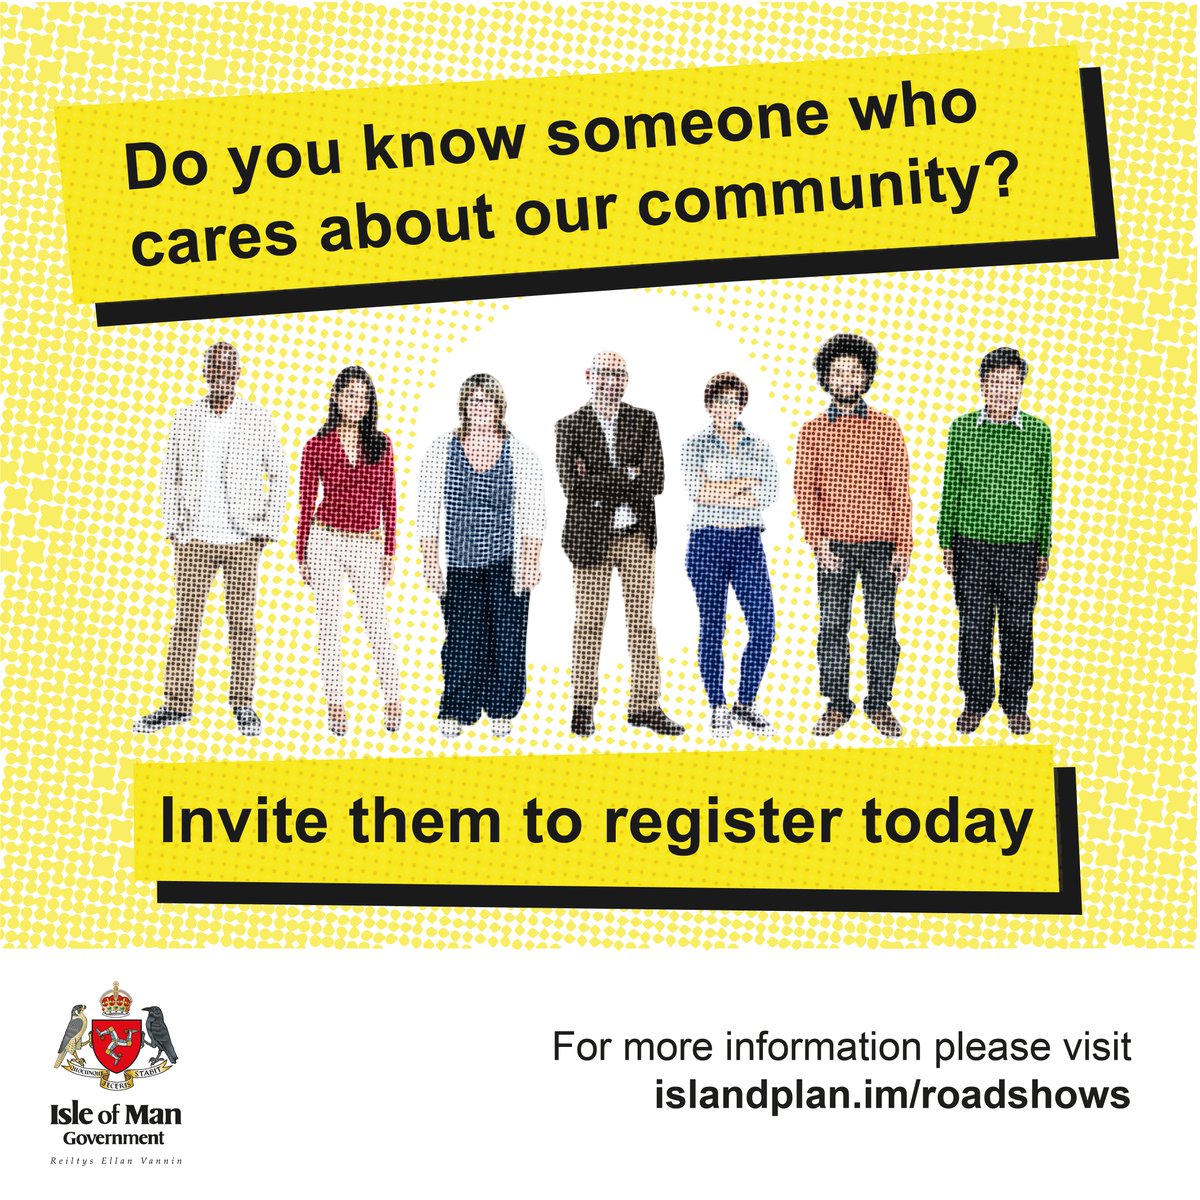 🇮🇲 Do you know someone who cares about the community here on the Isle of Man? Invite them to register for the upcoming Council of Minister's 'Listening to You' roadshows! 👉 islandplan.im/roadshows 🔁 RT